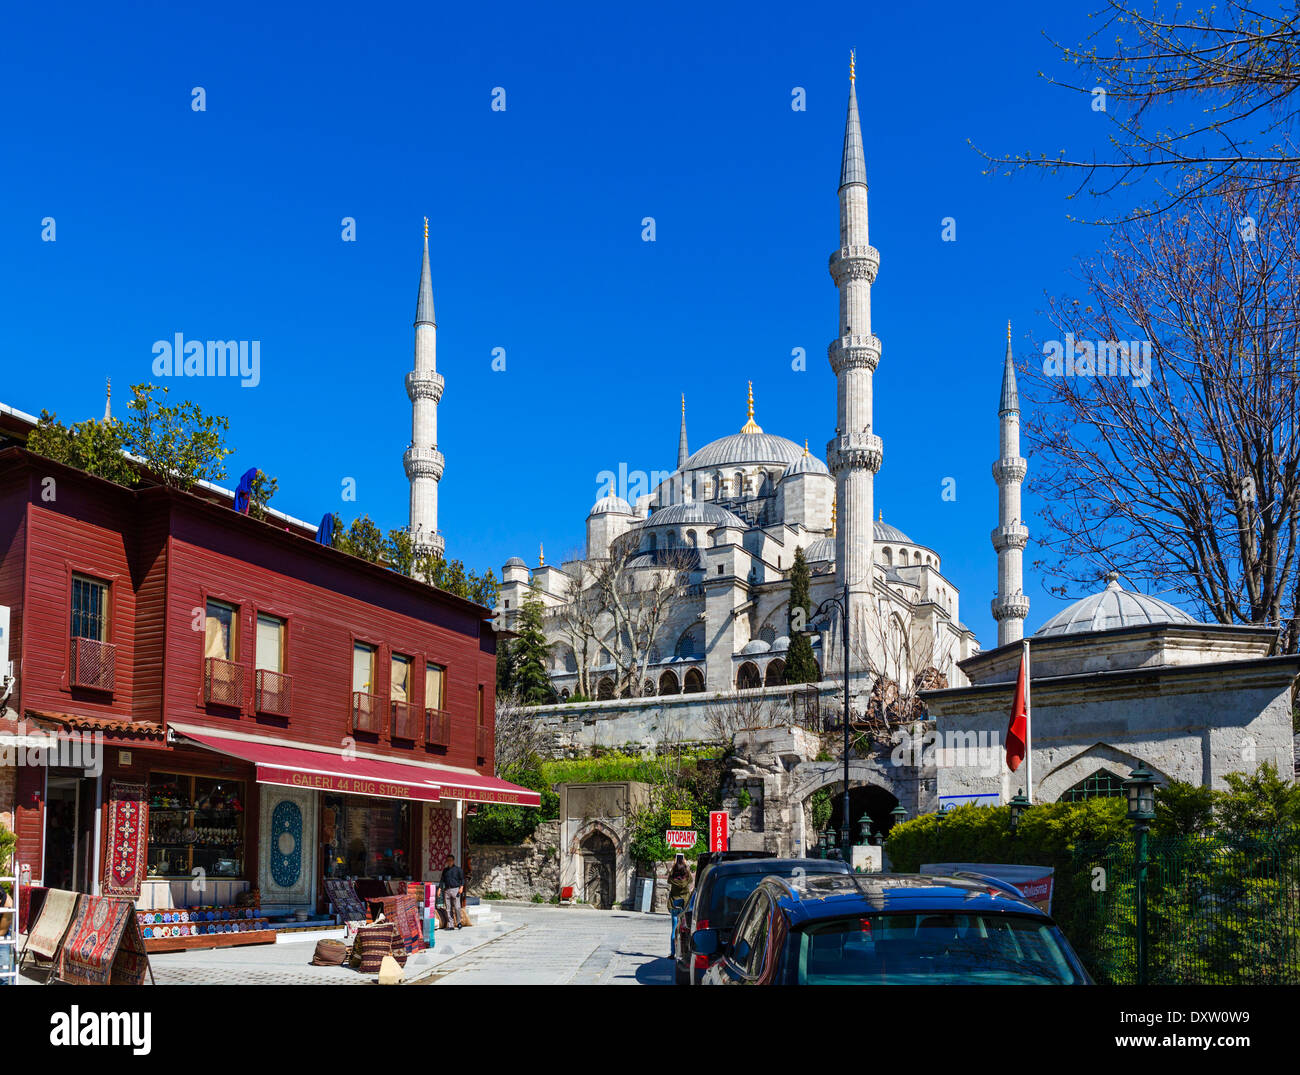 Carpet shop in front of the Blue Mosque (Sultanahmet Camii), Sultanahmet district, Istanbul,Turkey Stock Photo